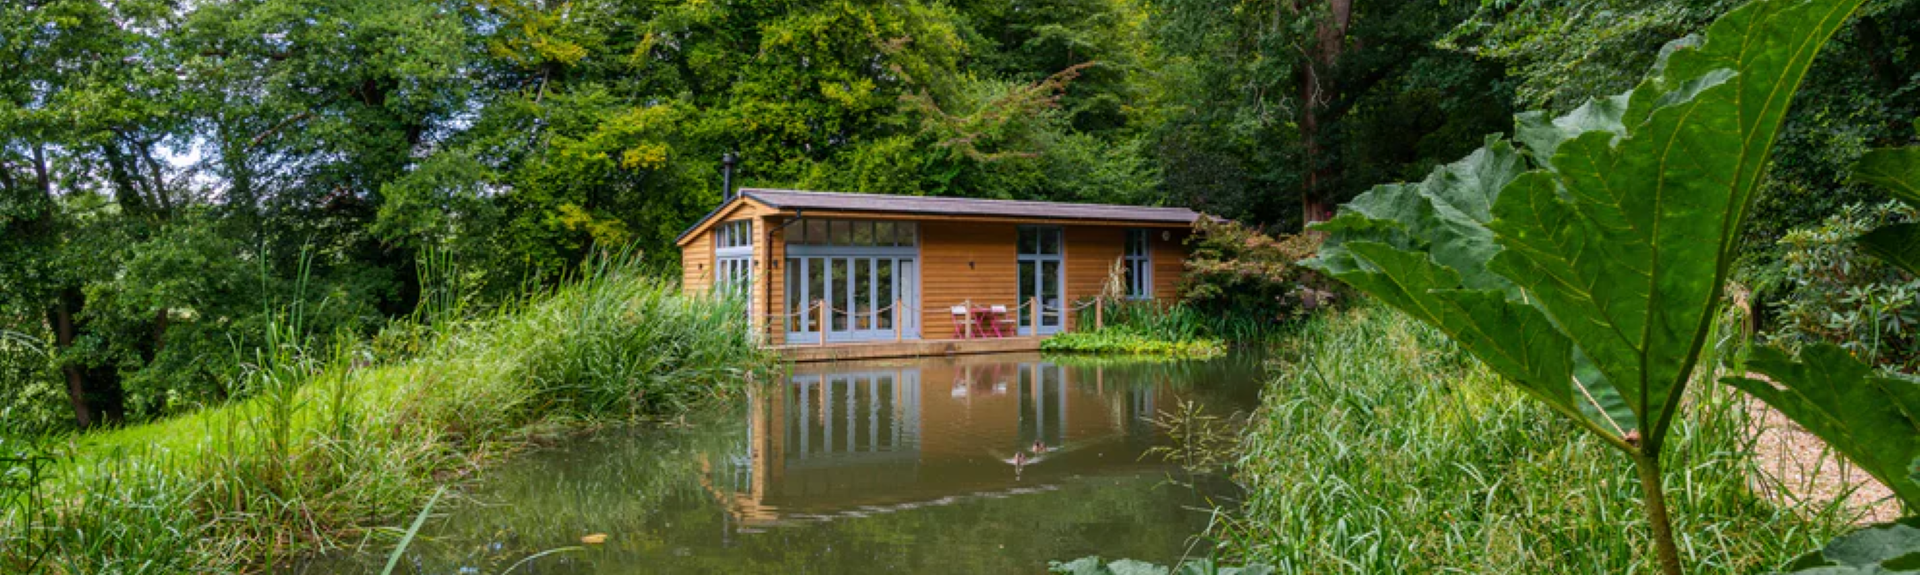 A pine lodge nestles in woodland overlooking a small lake with ducks swimming on it